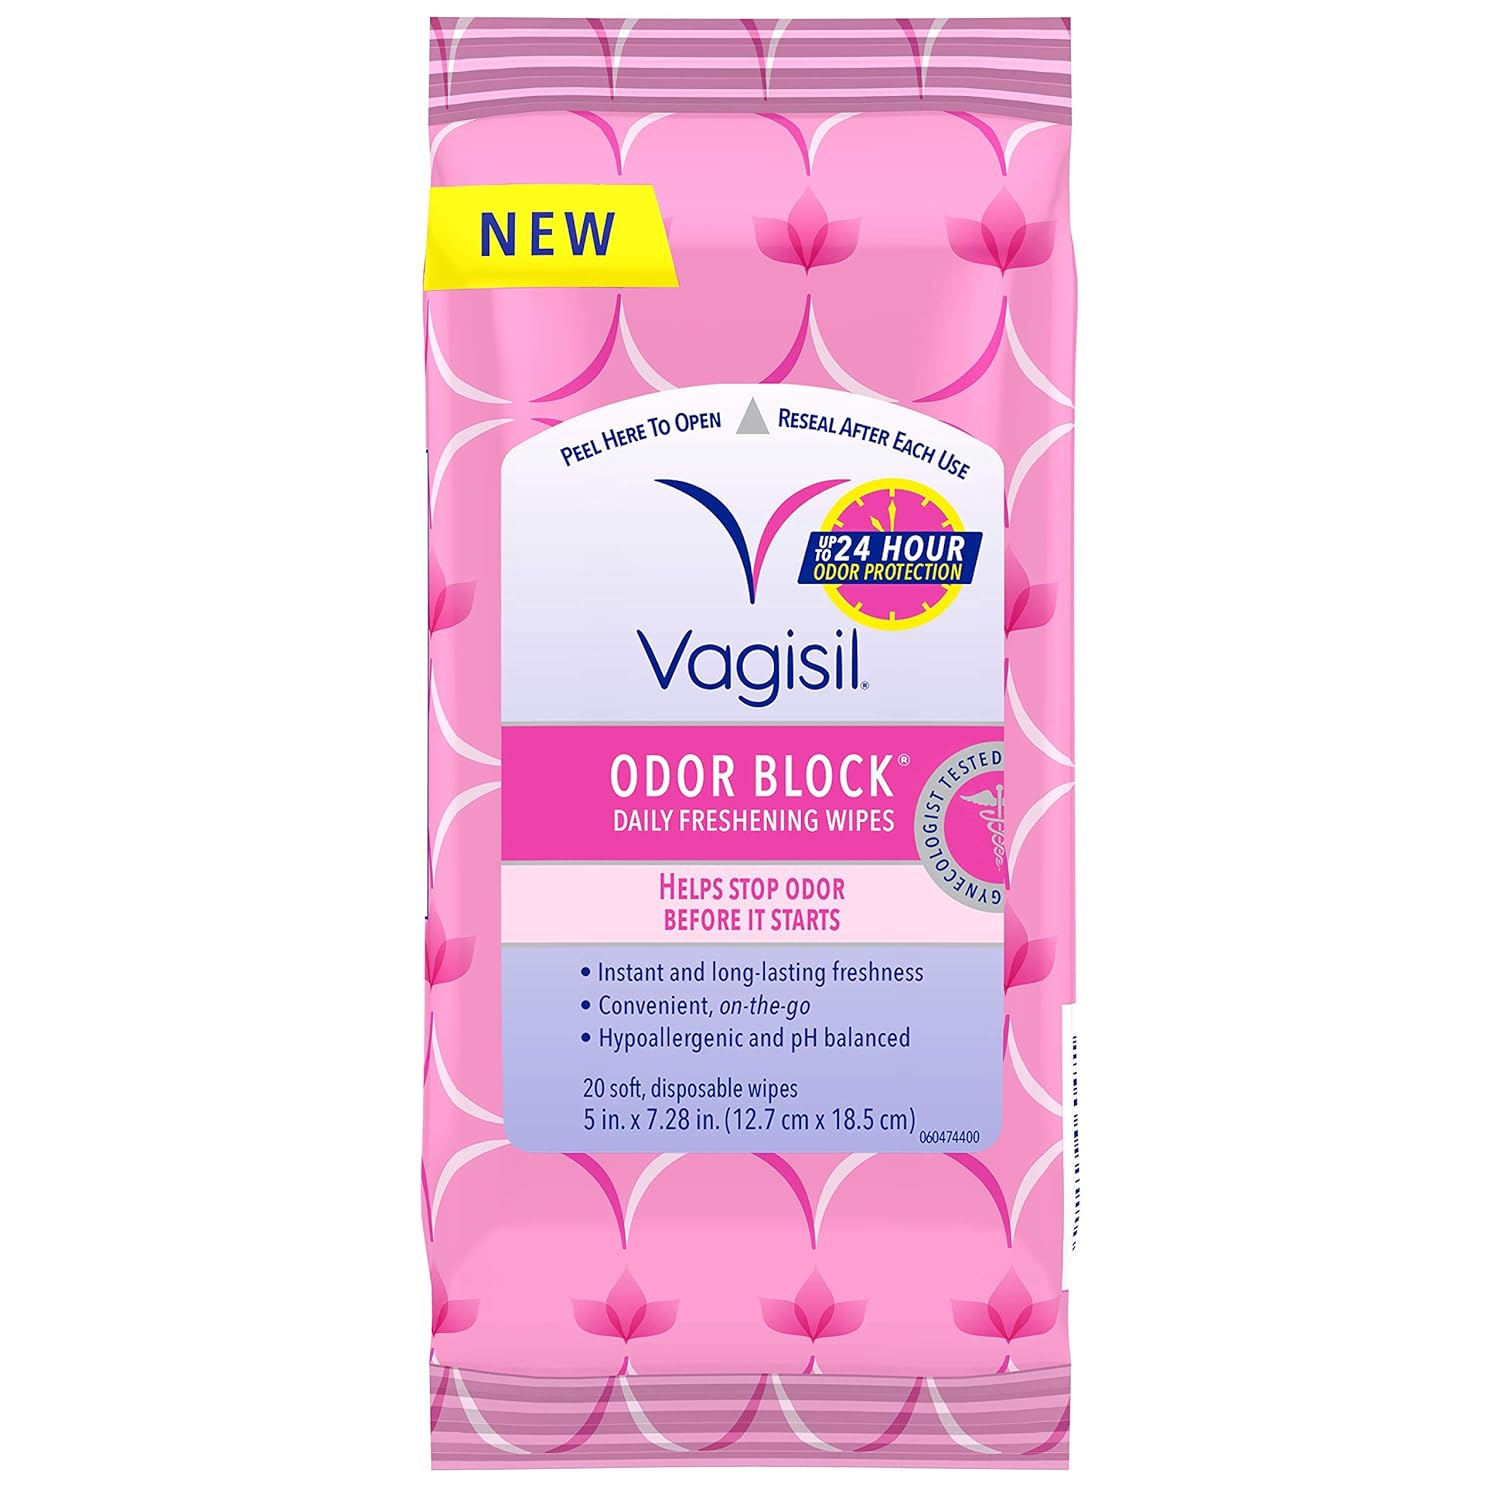 Vagisil Odor Block Daily Freshening Wipes for Feminine Hygiene in Resealable Pouch, Gynecologist Tested & Hypoallergenic, 20 Wipes (Pack of 1)